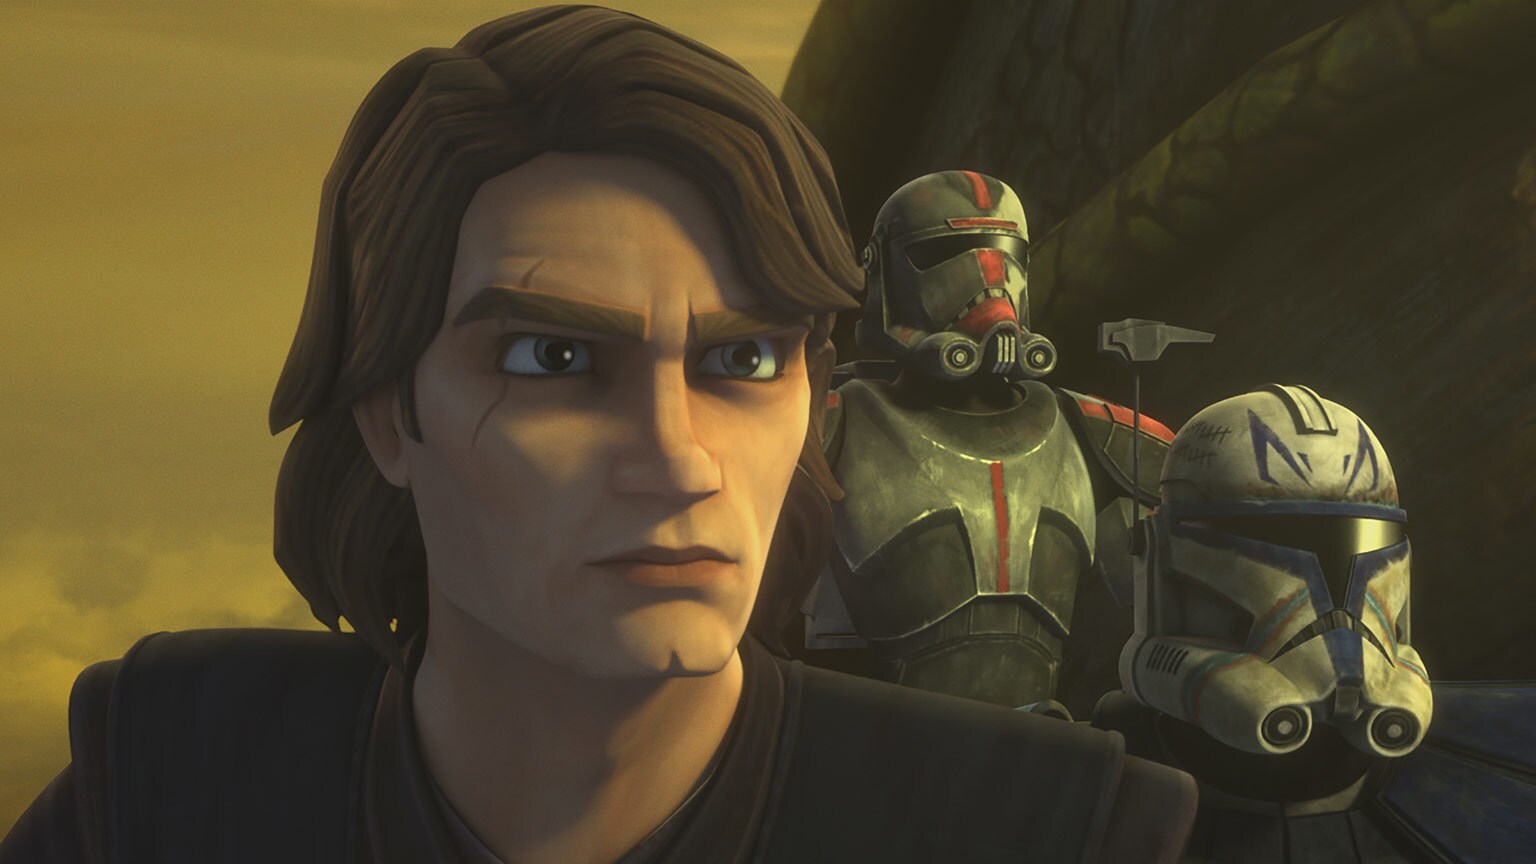 The Clone Wars Rewatch: Escape "On the Wings of Keeradaks"